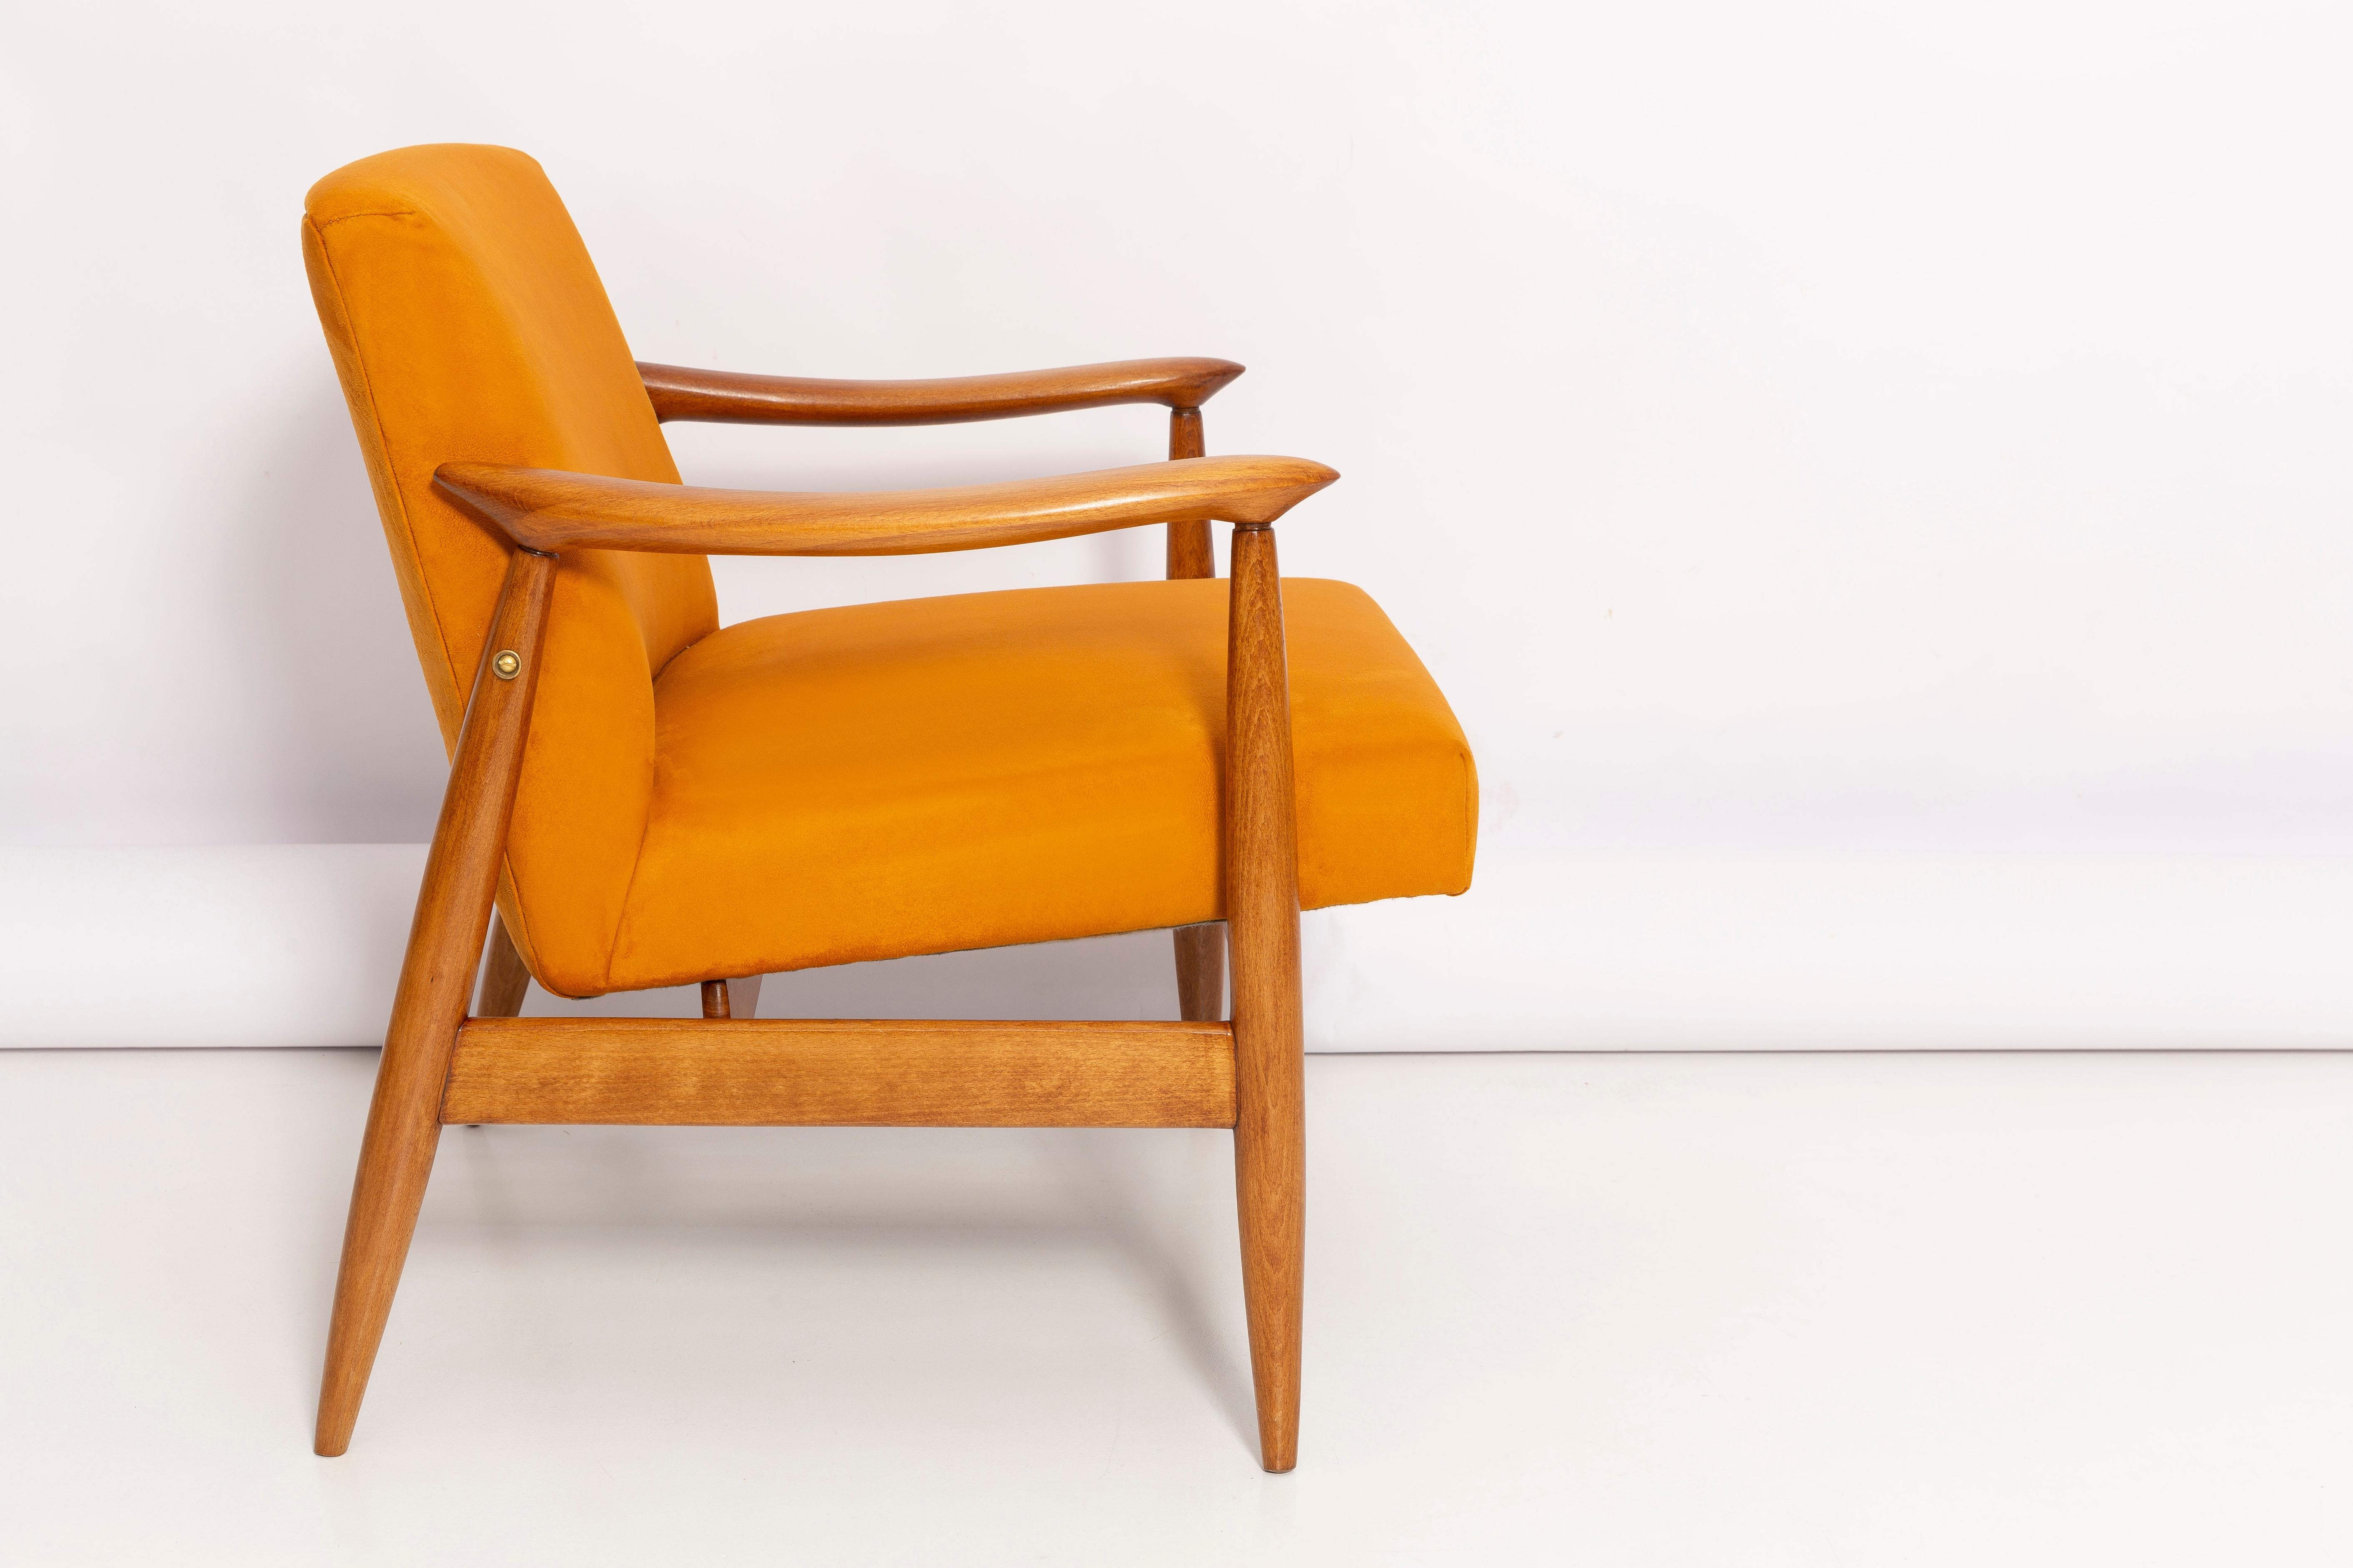 Textile Pair of Mid Century Yellow Armchairs, Designed by J. Kedziorek, Poland, 1960s For Sale